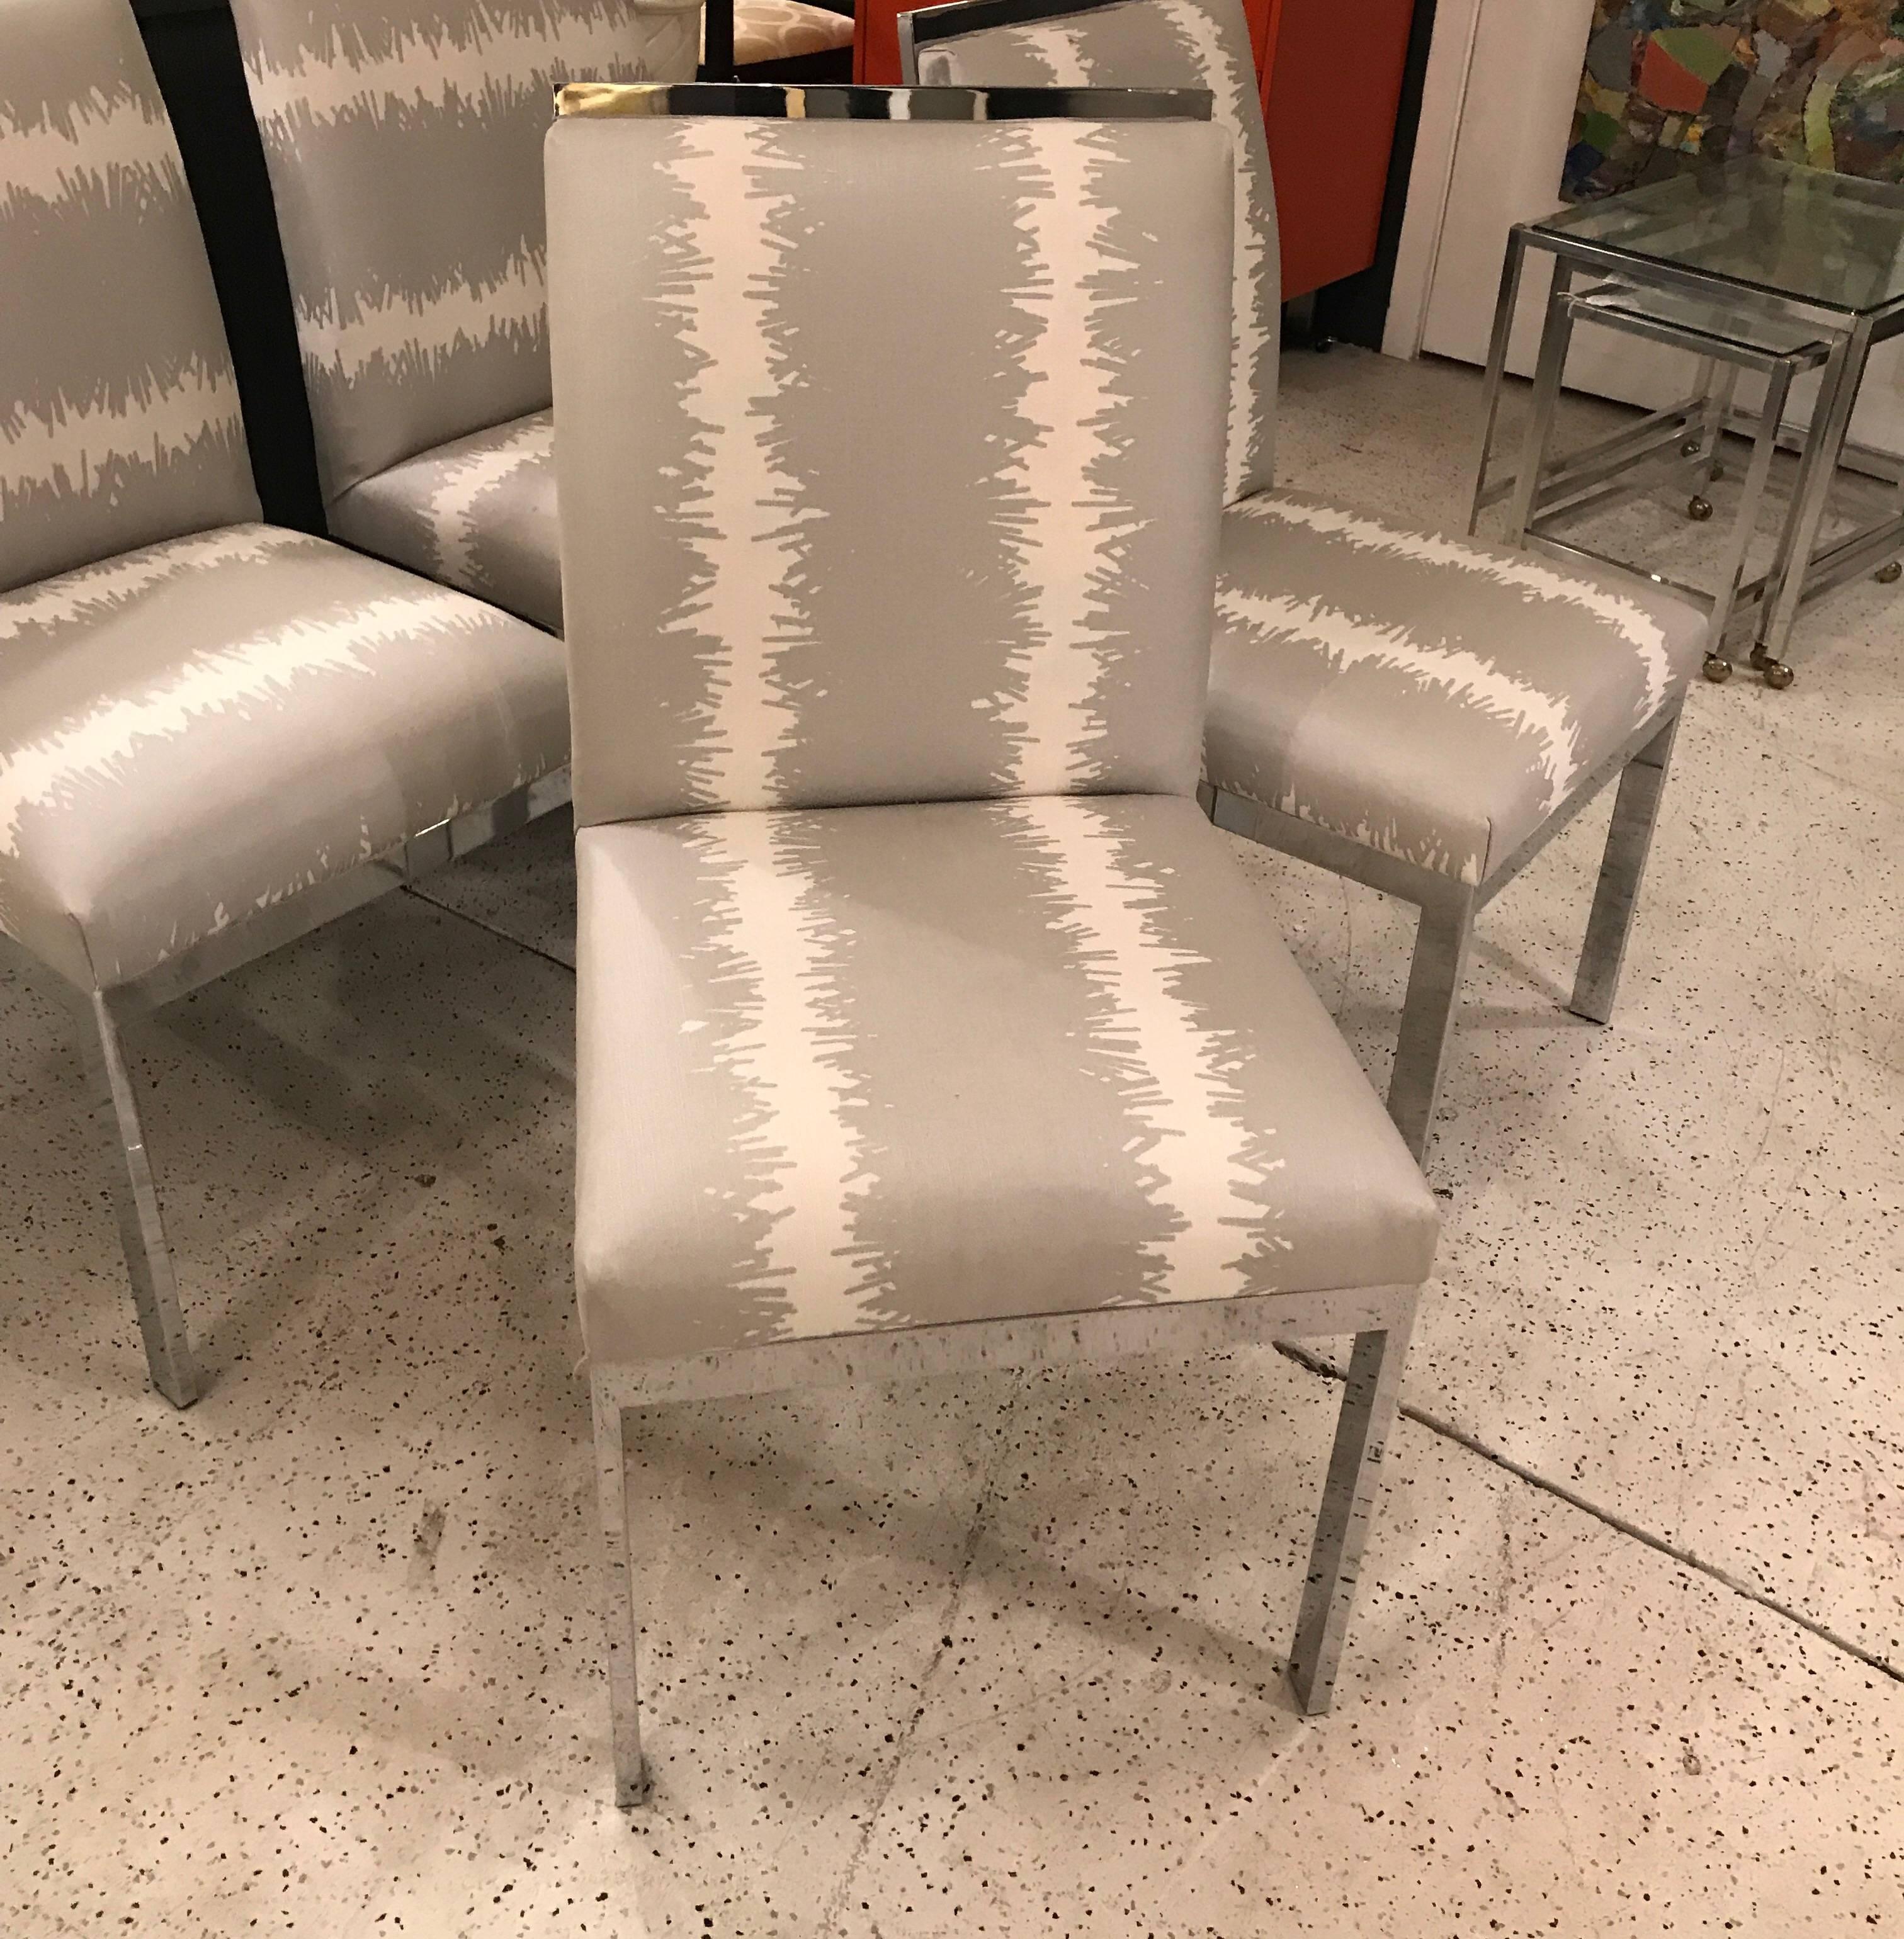 A set of four chrome parsons chairs with Schumacher Studio Bon BANG cotton linen fabric.  Two chairs are done with the fabric running vertically and the other two running horizontally.   